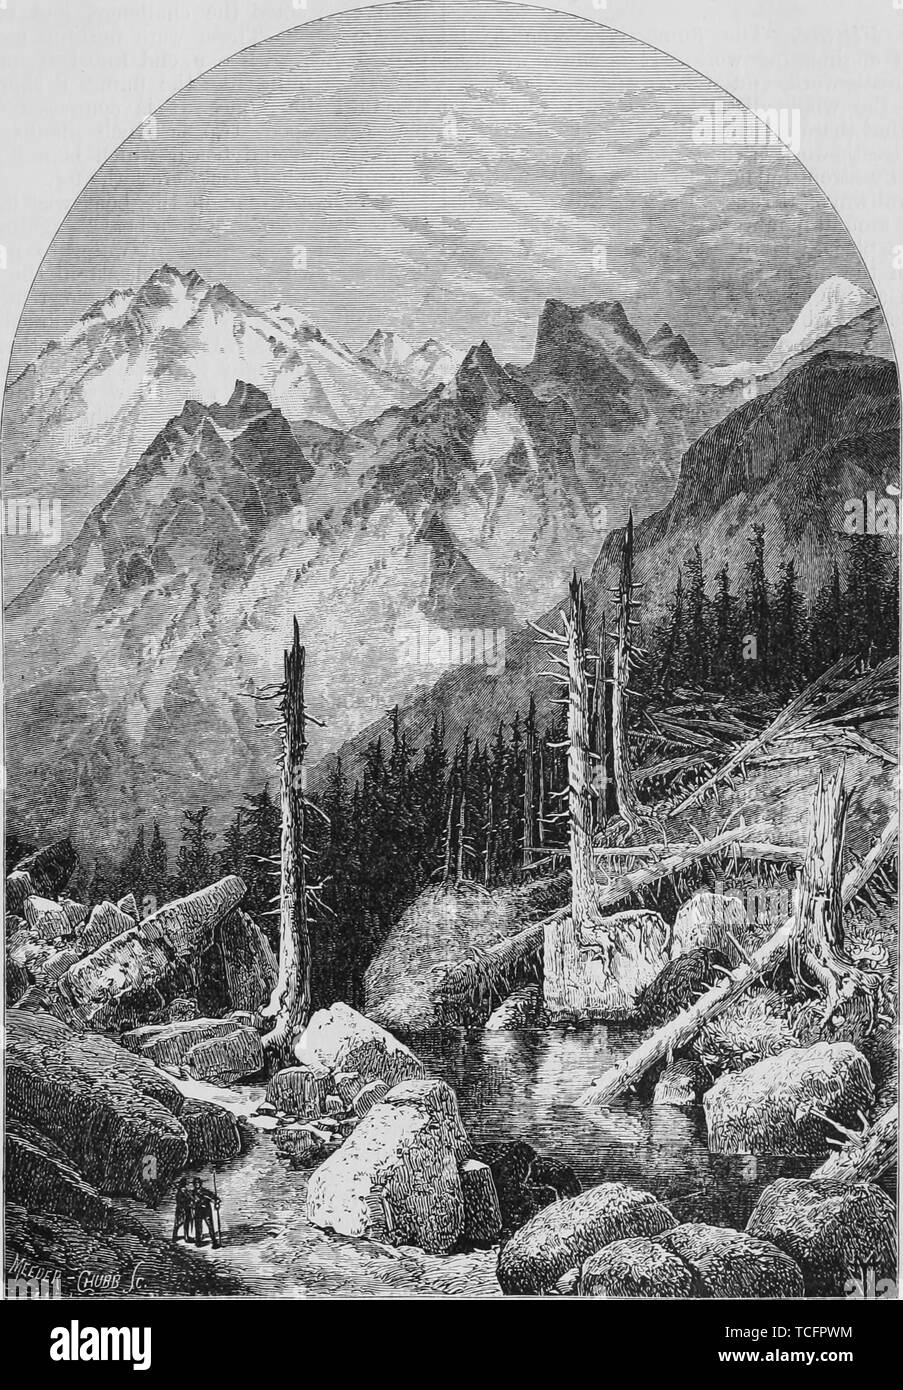 Engraving of the Summit in the Sierra Nevada mountain range, California, antique print 1874, from the book 'The Pacific tourist' by Henry T. Williams, 1878. Courtesy Internet Archive. () Stock Photo